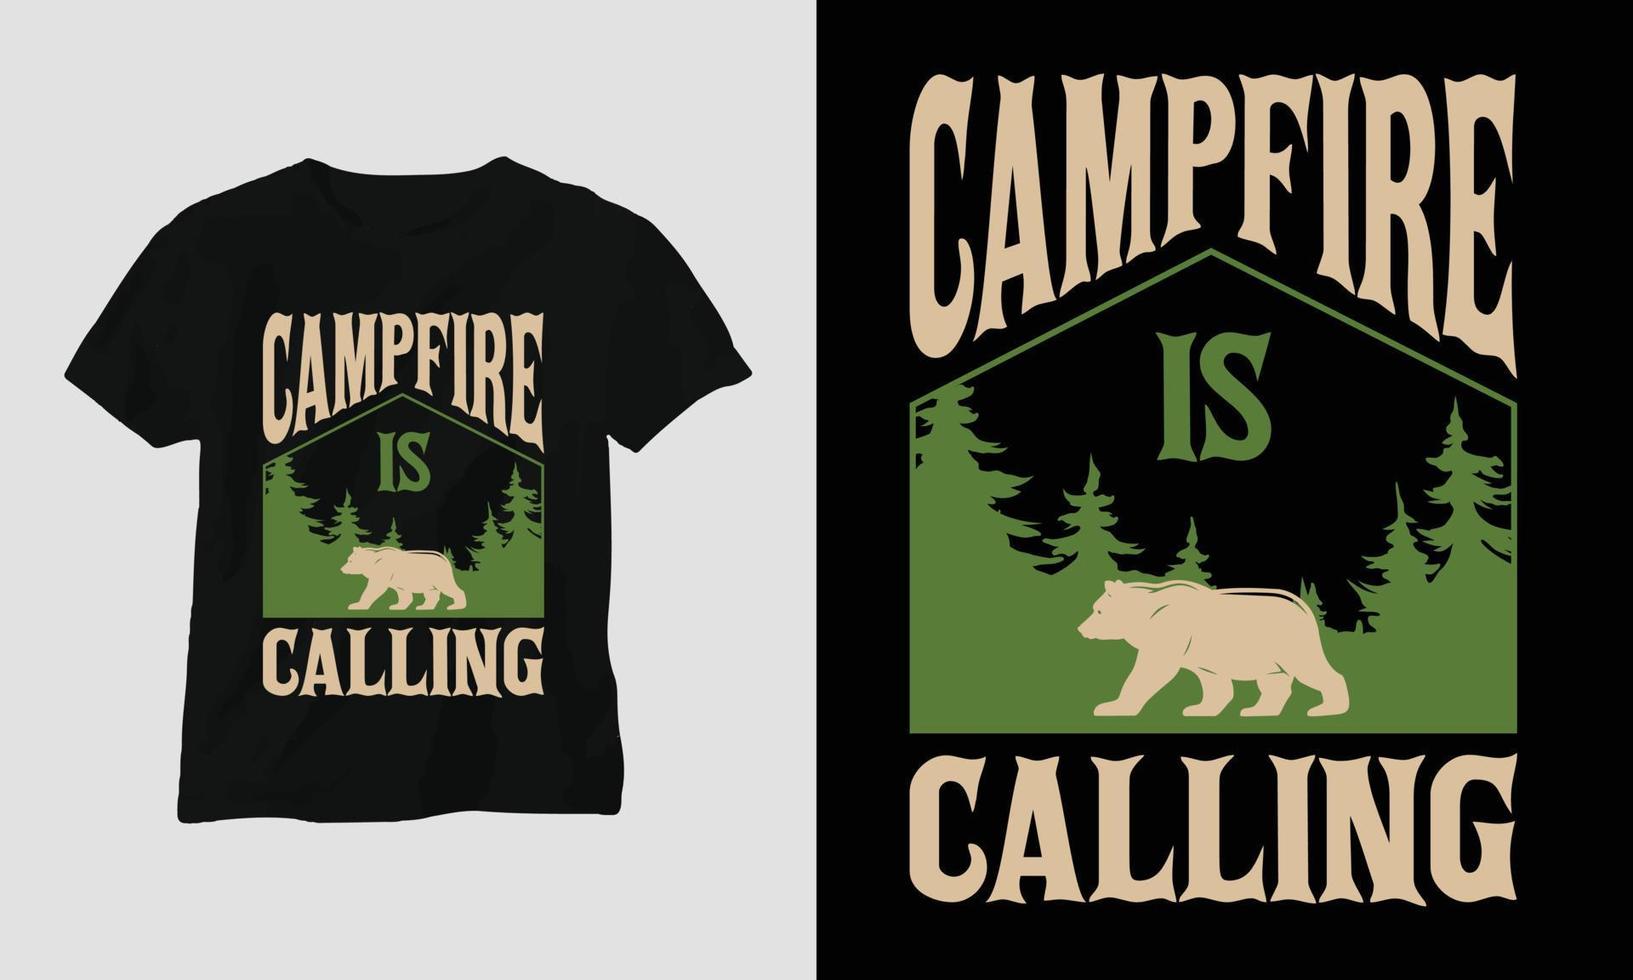 Campfire Is Calling - Camping T-shirt design vector